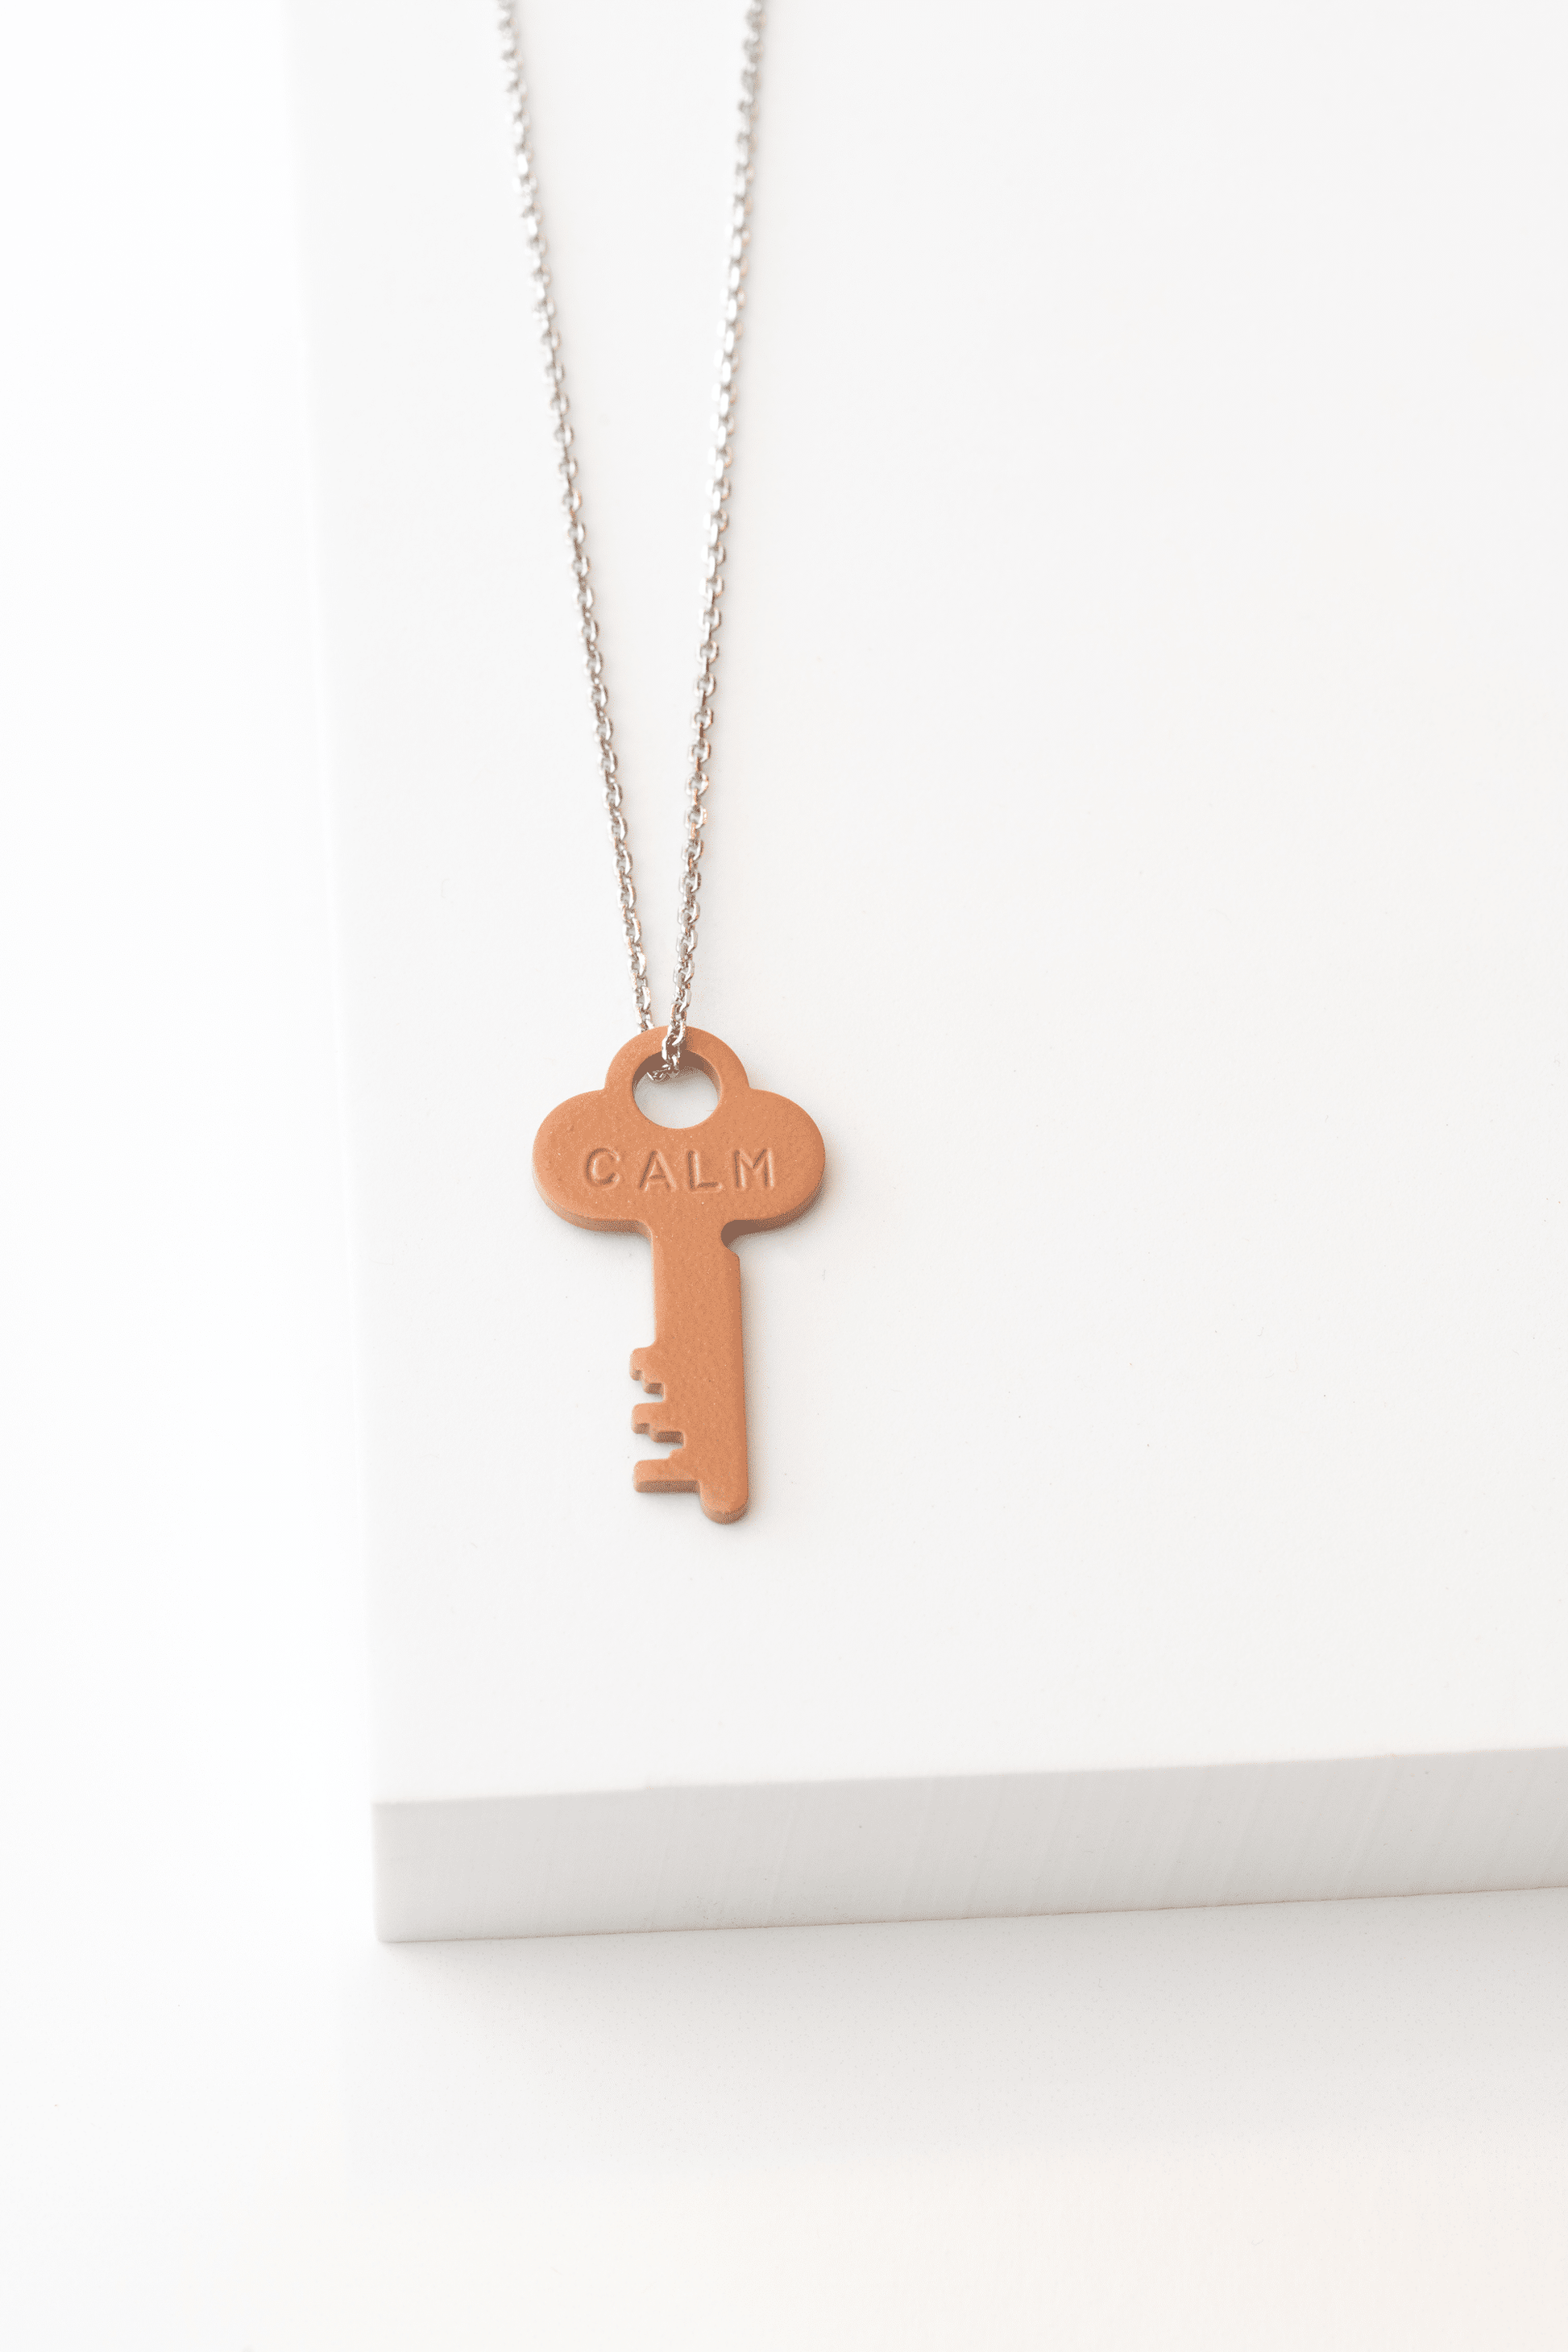 Peach Fuzz Dainty Key Necklace Necklaces The Giving Keys Silver 